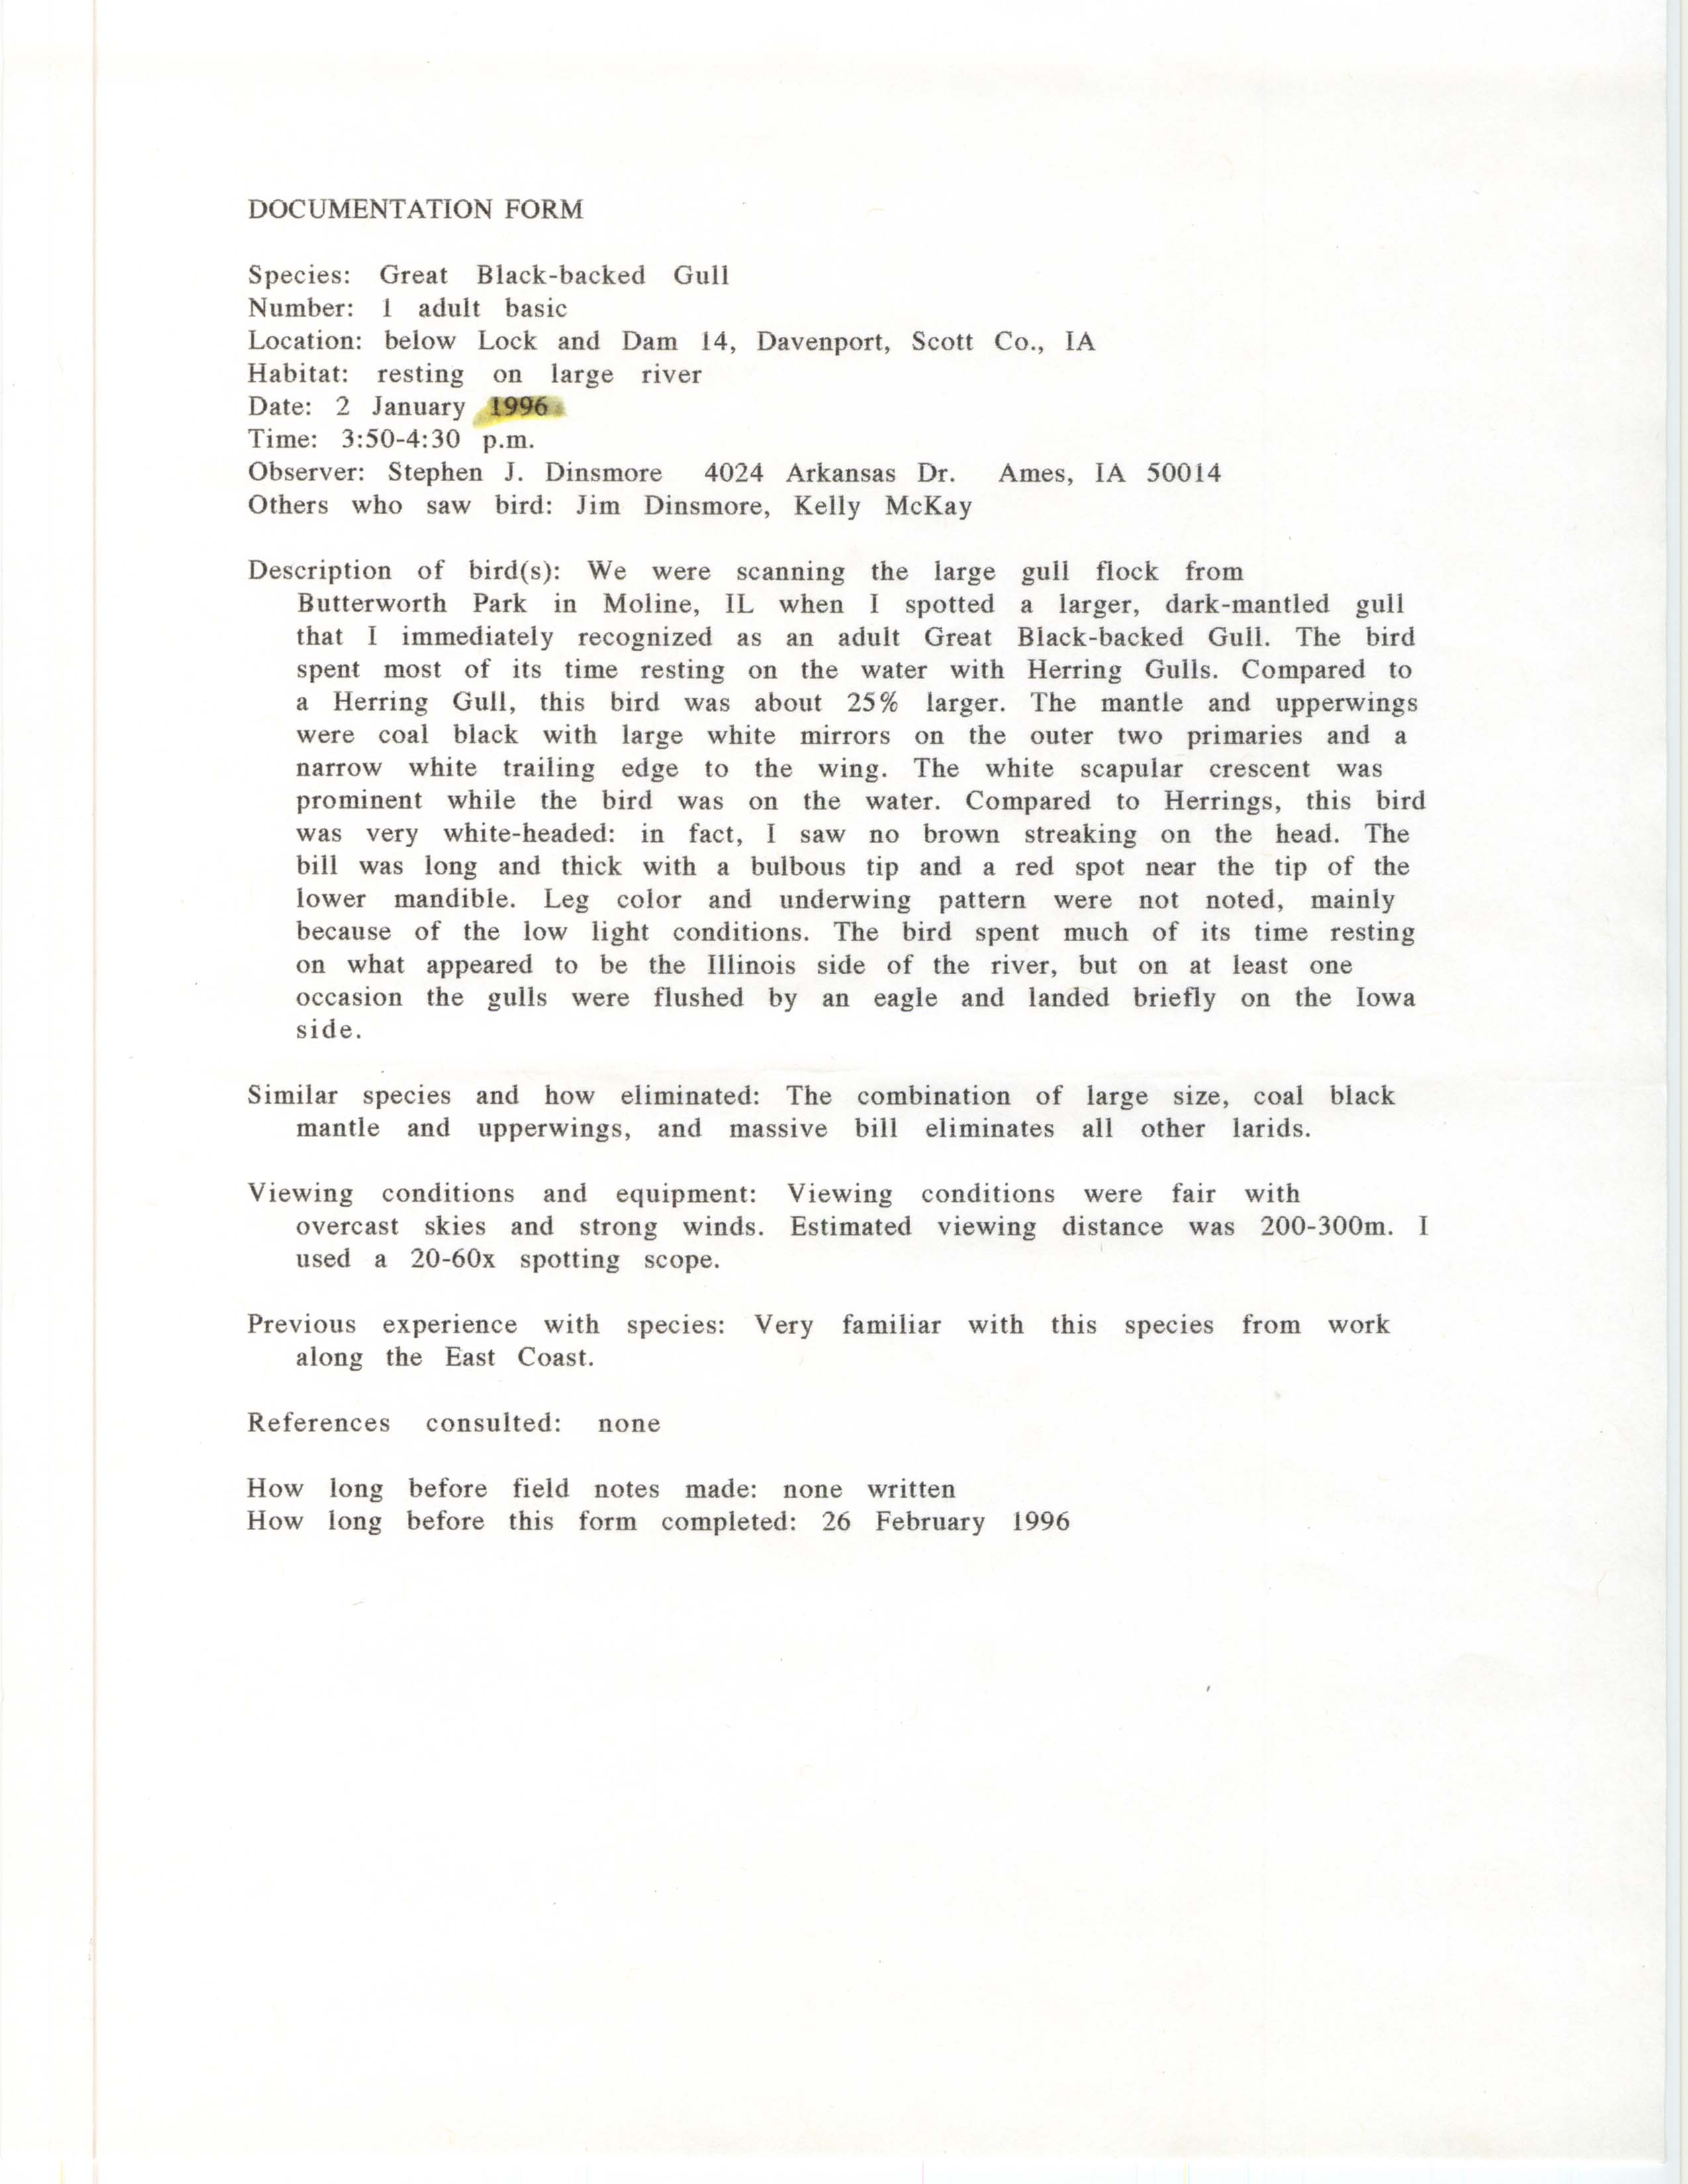 Rare bird documentation form for Great Black-backed Gull at Lock and Dam 14, 1996